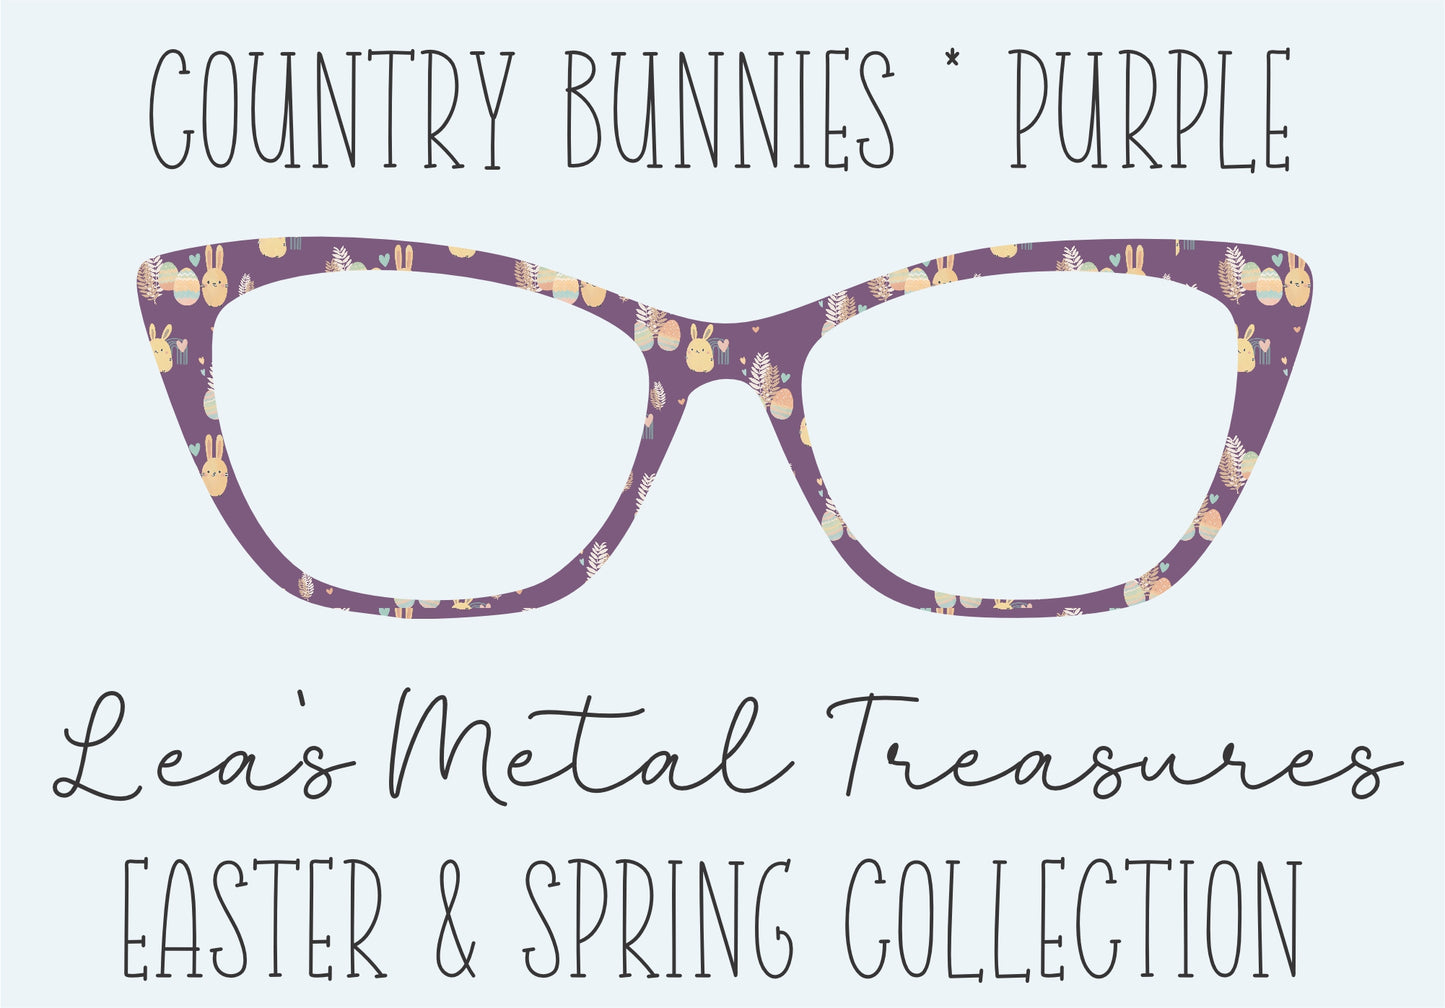 COUNTRY BUNNIES PURPLE Eyewear Frame Toppers COMES WITH MAGNETS